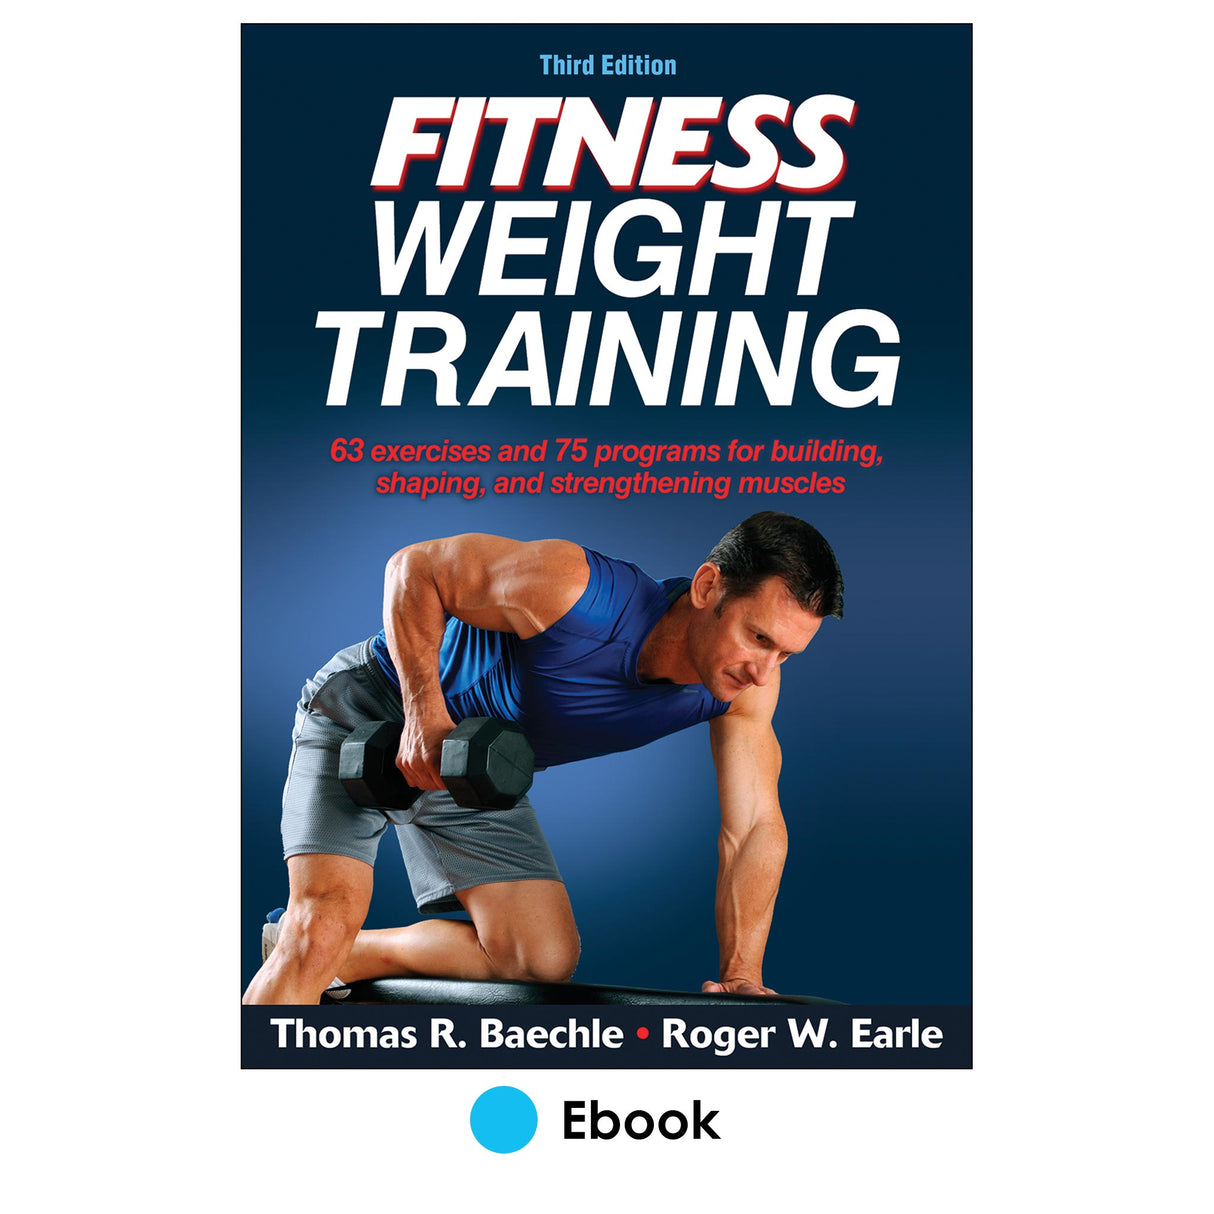 Fitness Weight Training 3rd Edition PDF